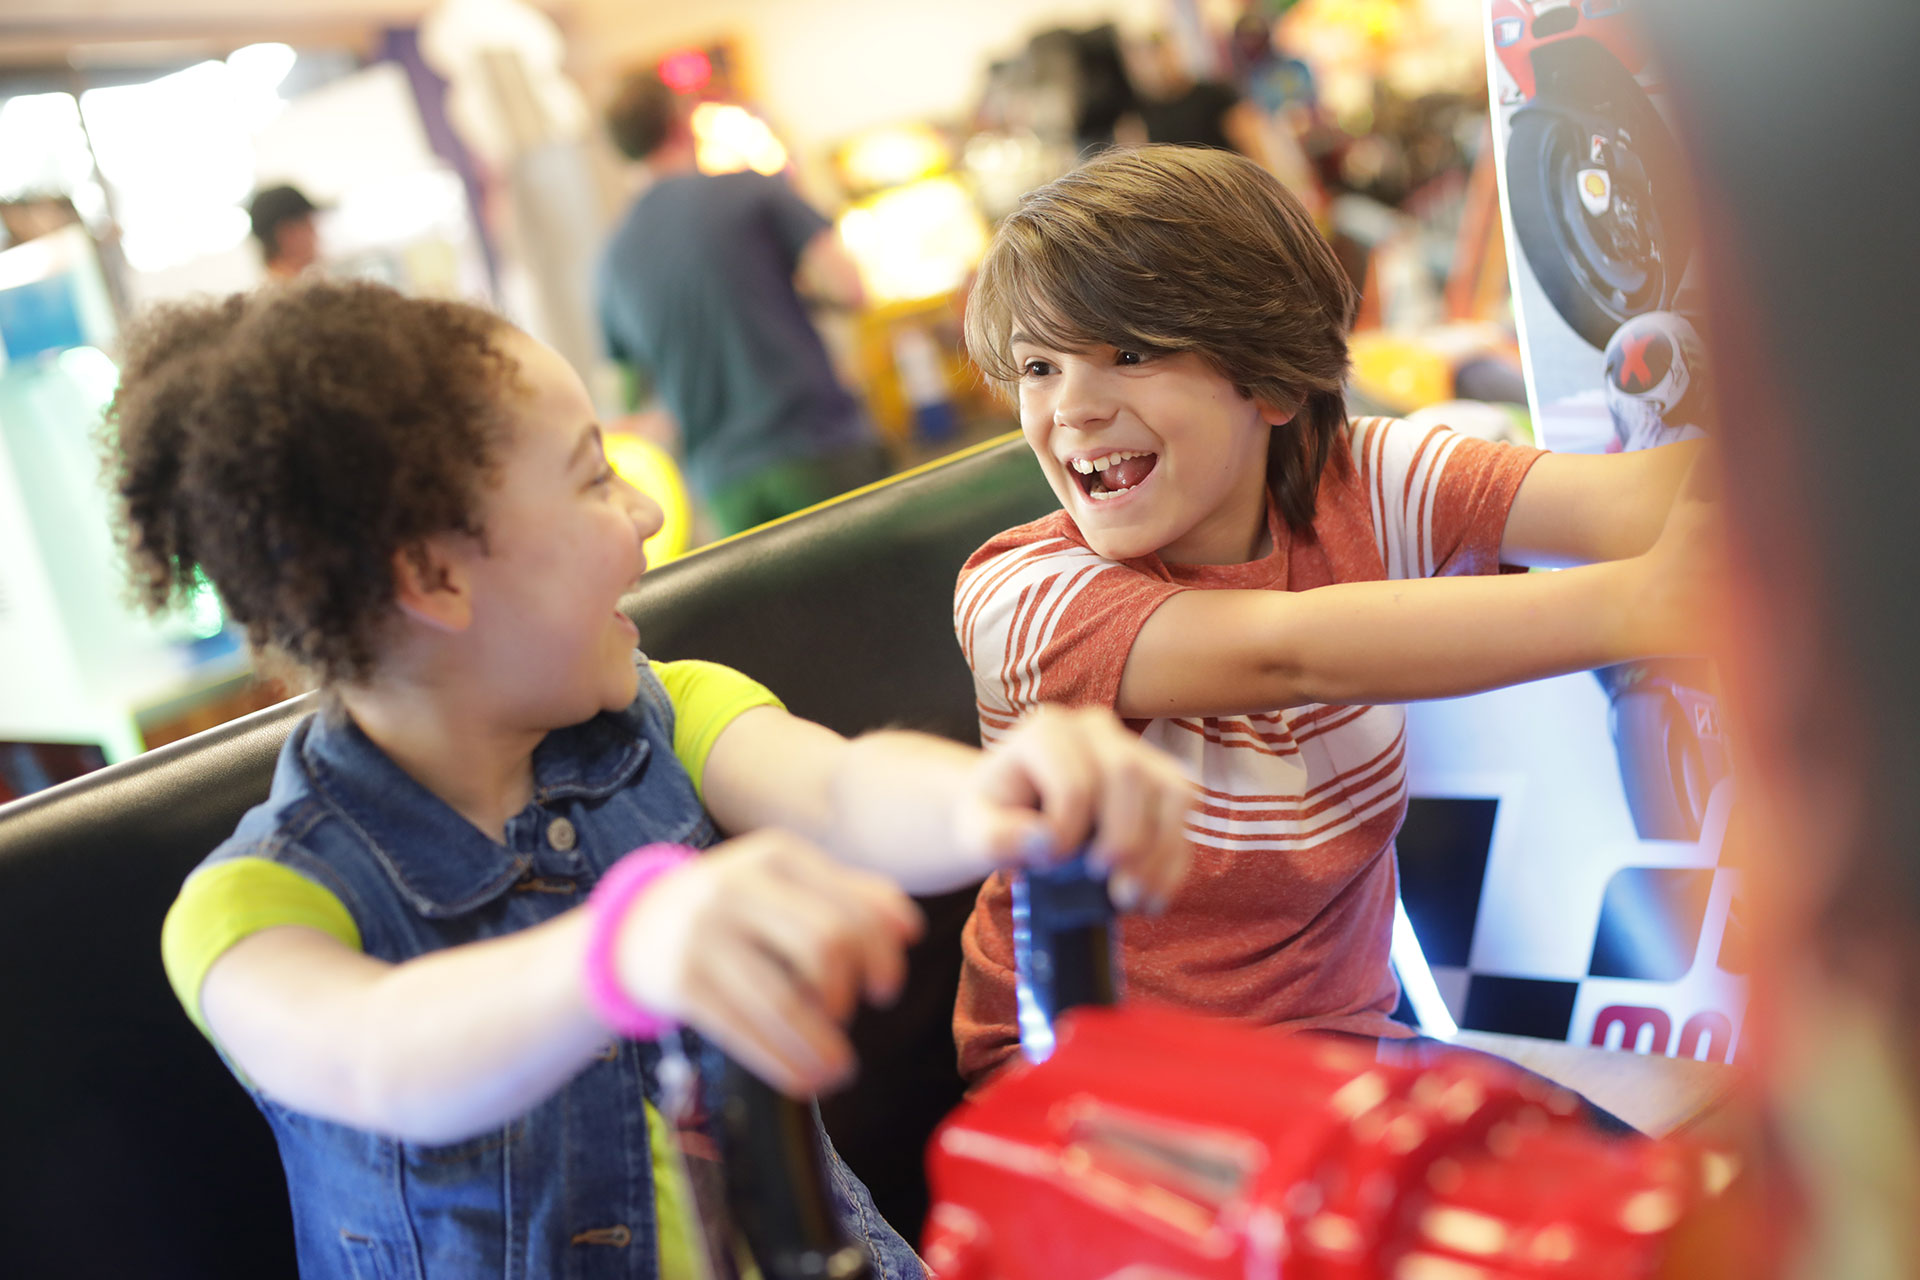 Kids playing arcade game smiling at each other